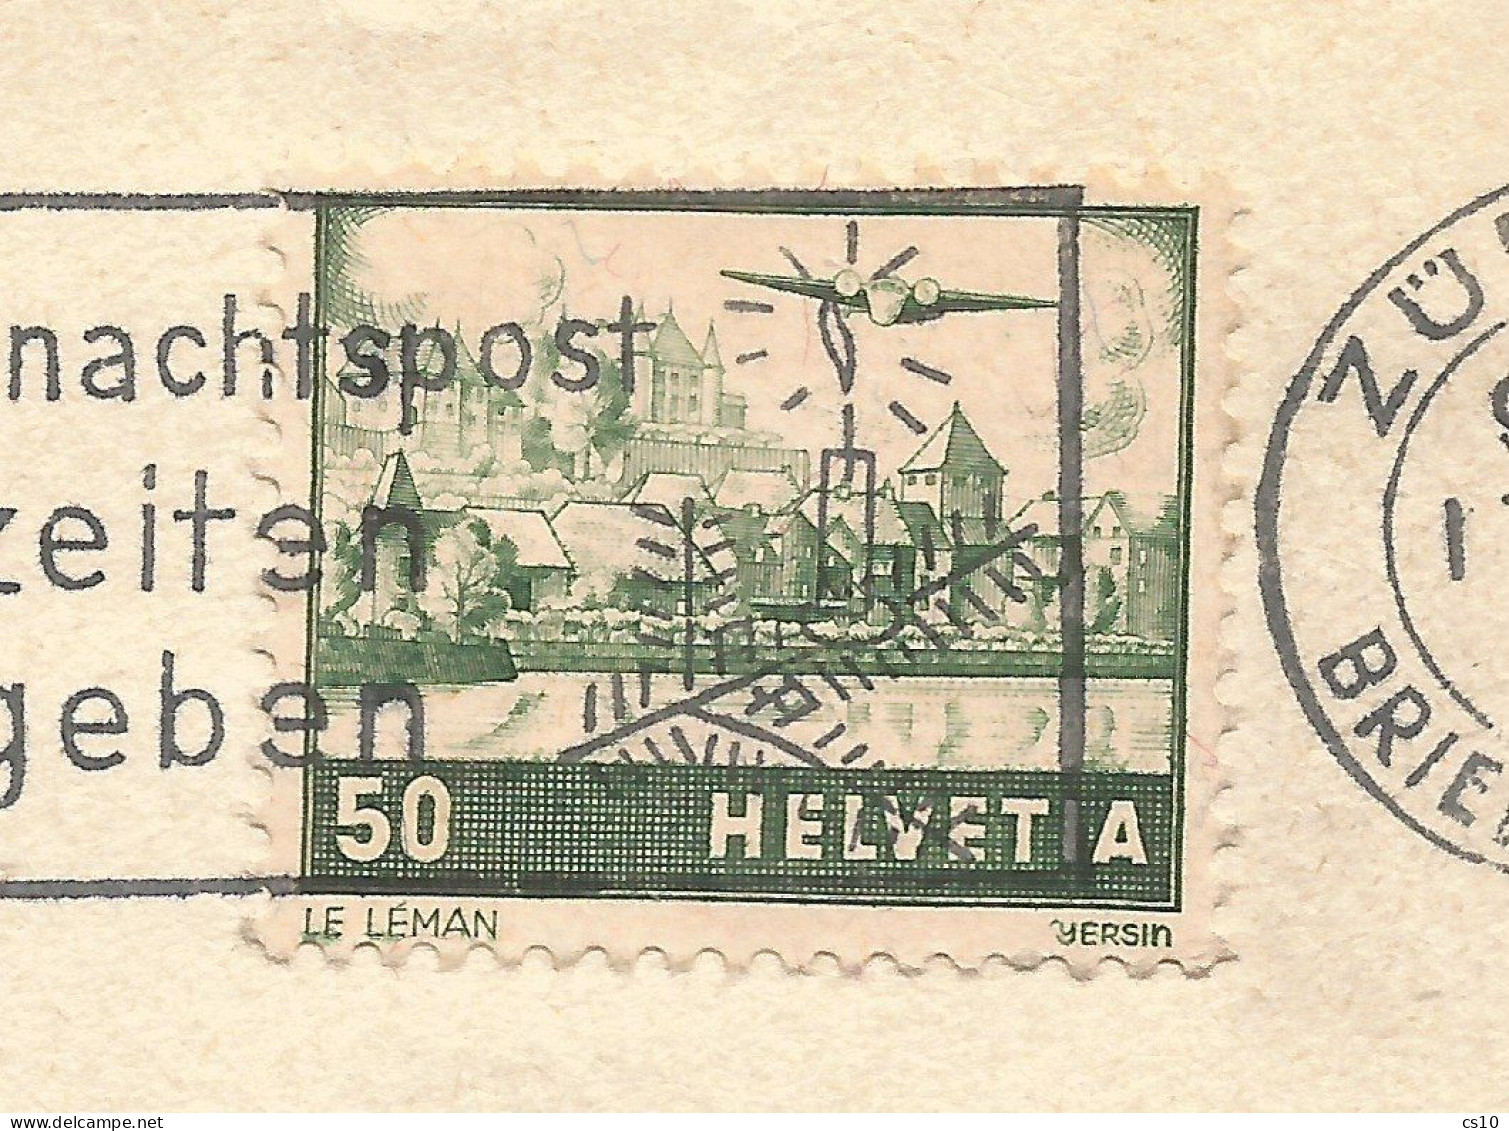 Suisse 1941 Airmail C.50 Green Variety "Weisses Dach" "White Roof" #29a Solo Franking Commerce AirCv To Milano 17dec1946 - Errores & Curiosidades